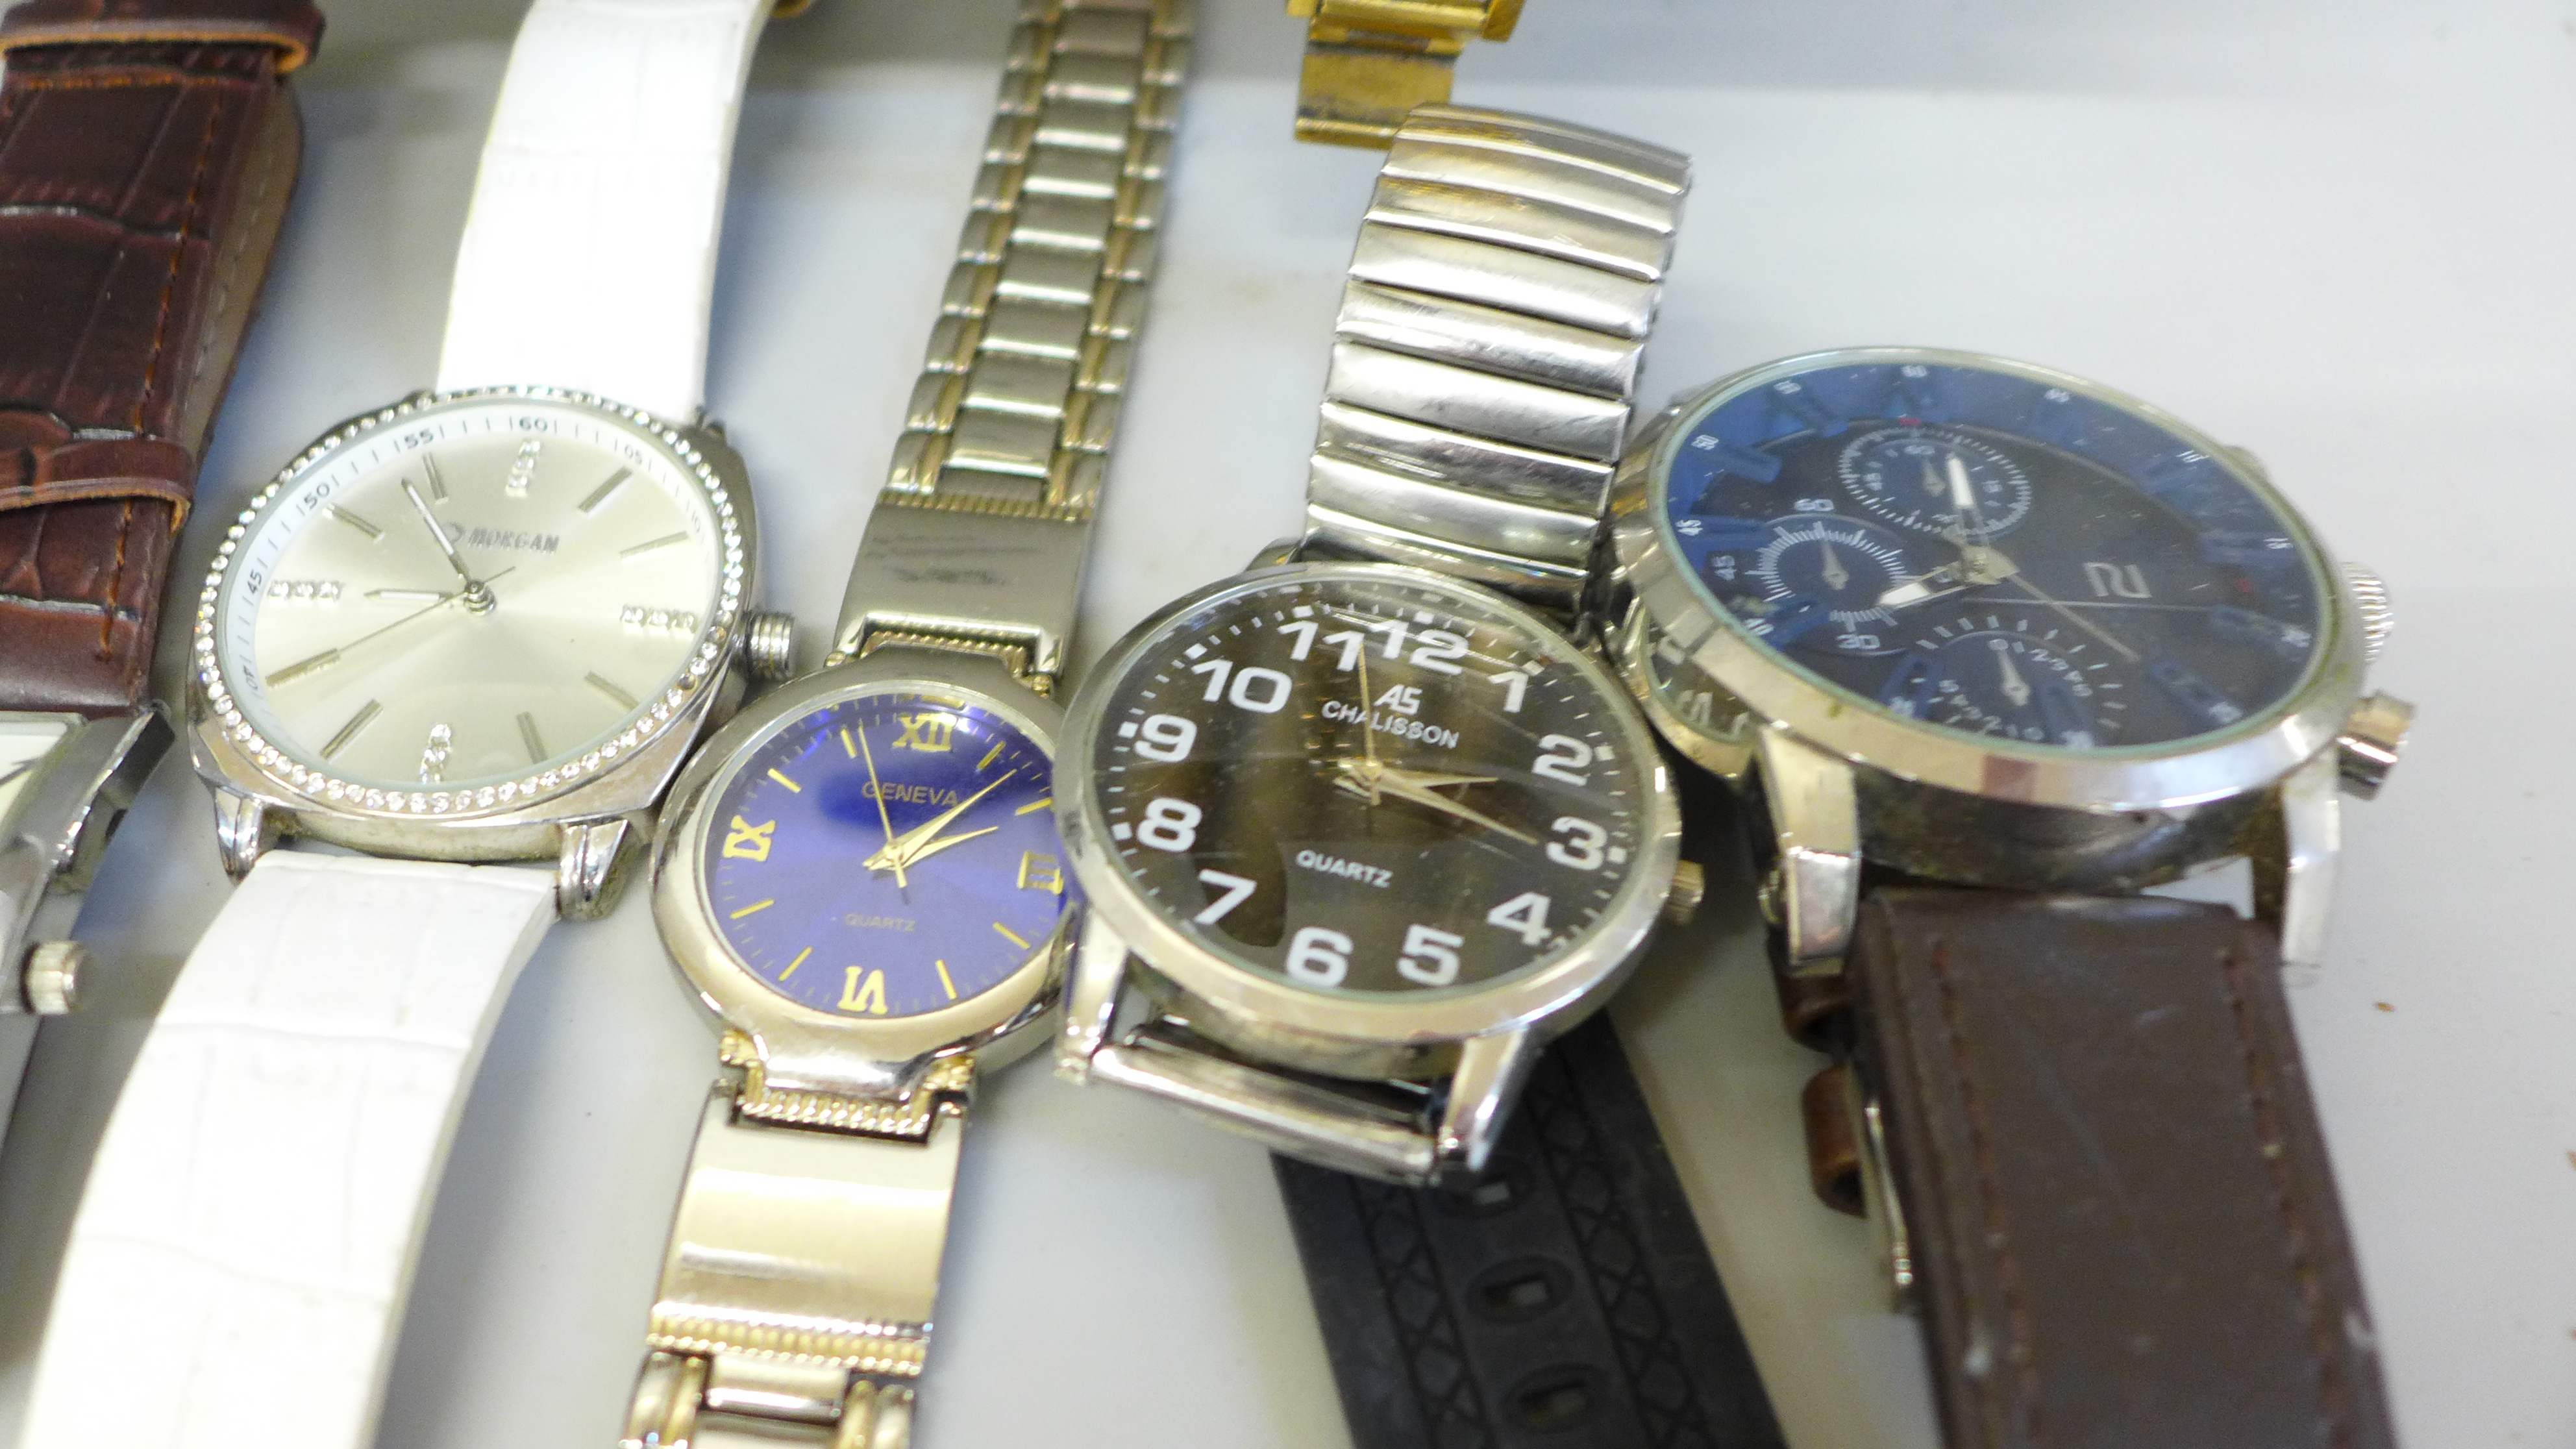 A quantity of lady's and gentleman's wristwatches; Timex, Swatch, Sekonda, etc. - Image 2 of 4